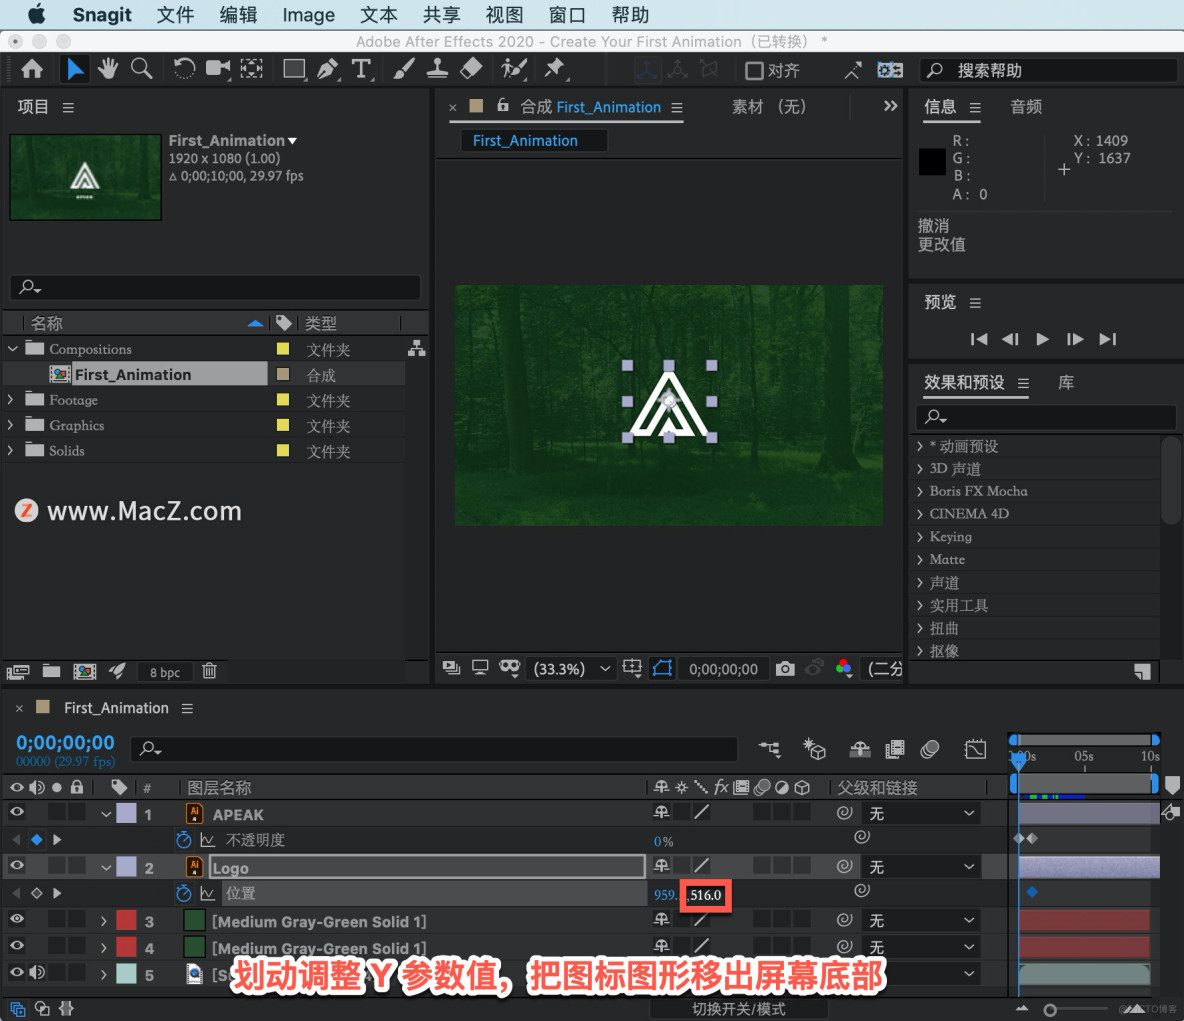 After Effects 教程，如何在 After Effects 中创建动画？_After Effects_05